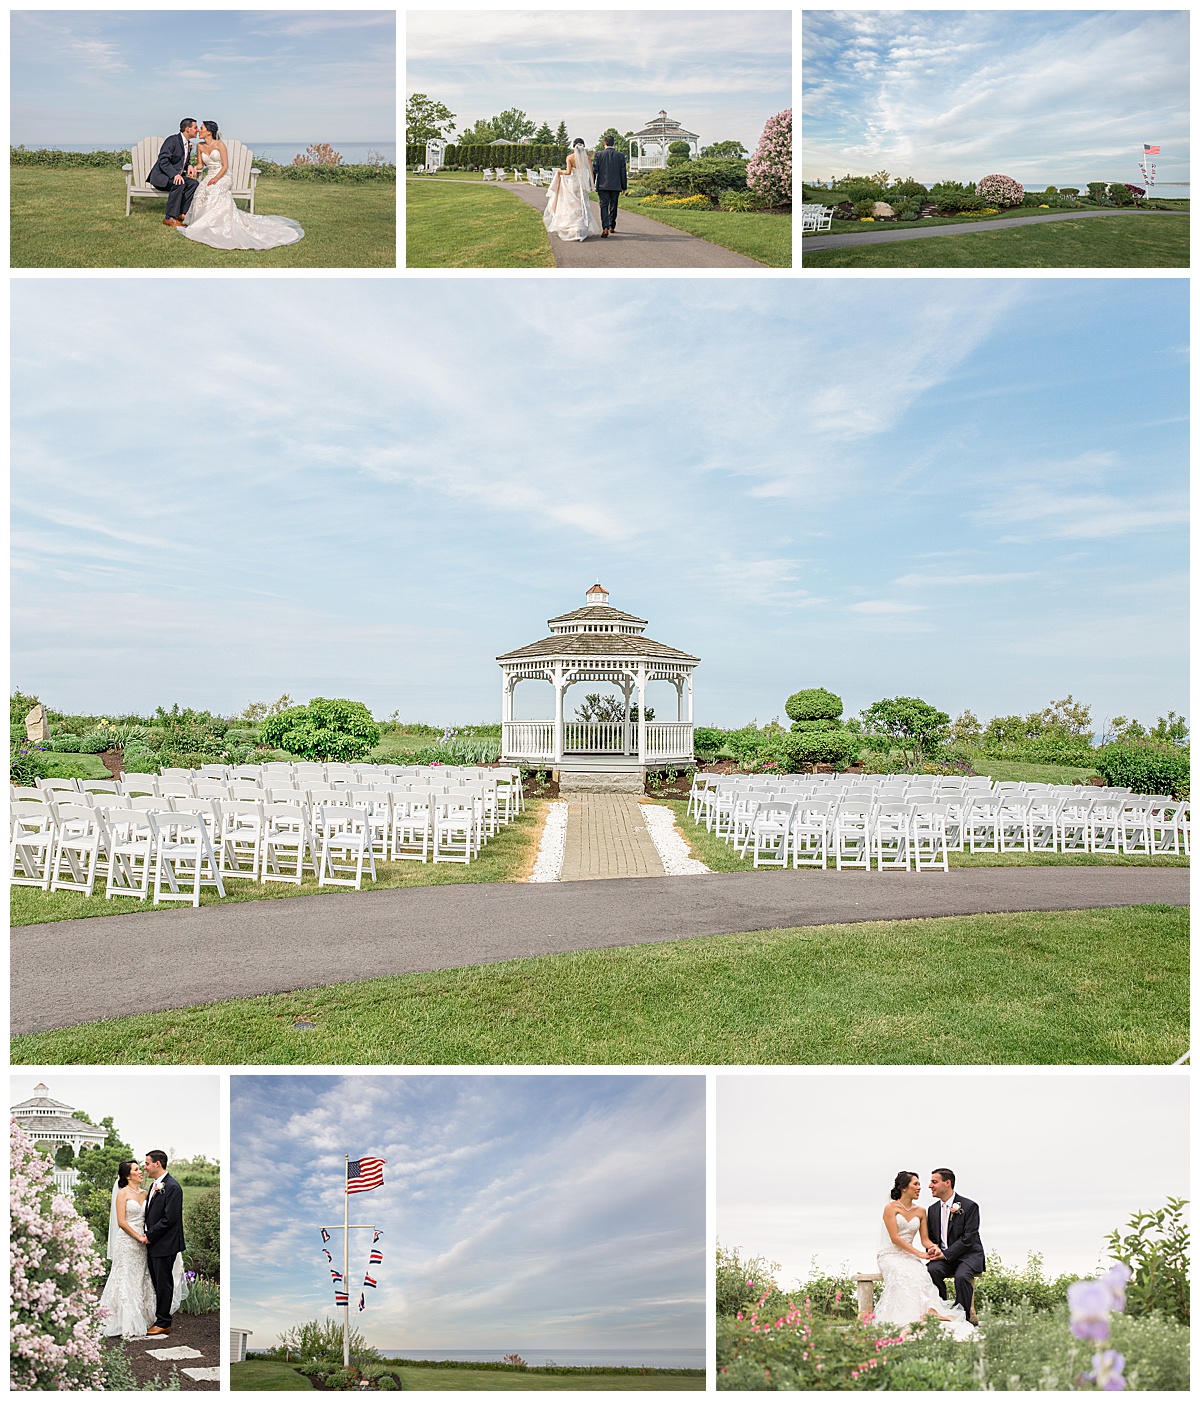 White Cliffs Country Club offers beautiful gardens for the perfect garden wedding ceremony. 